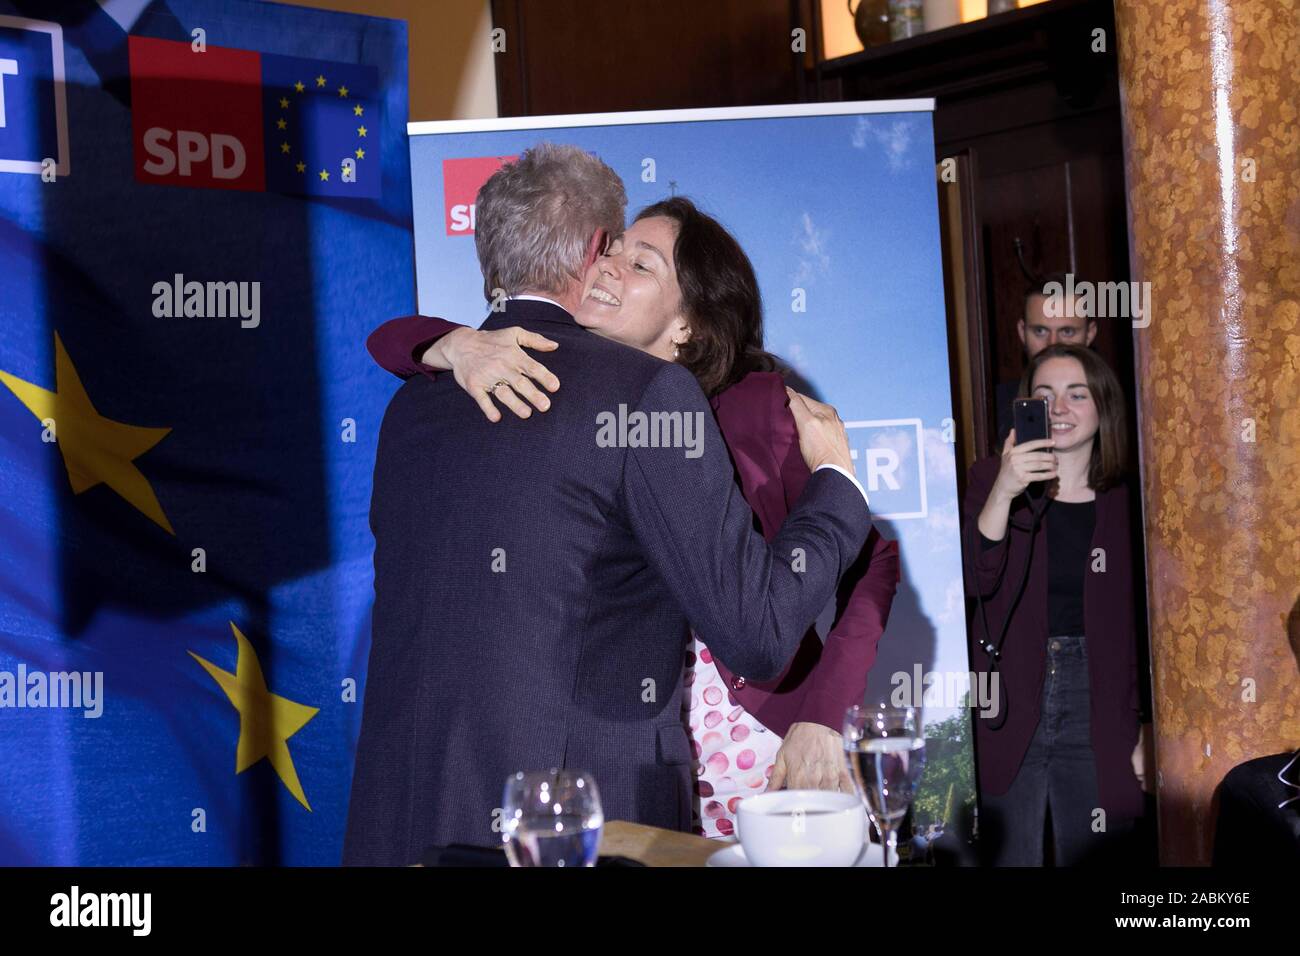 Top candidate Katarina Barley is embraced by Lord Mayor Dieter Reiter at an SPD election campaign event for the 2019 European elections in the Franziskaner in Munich. [automated translation] Stock Photo